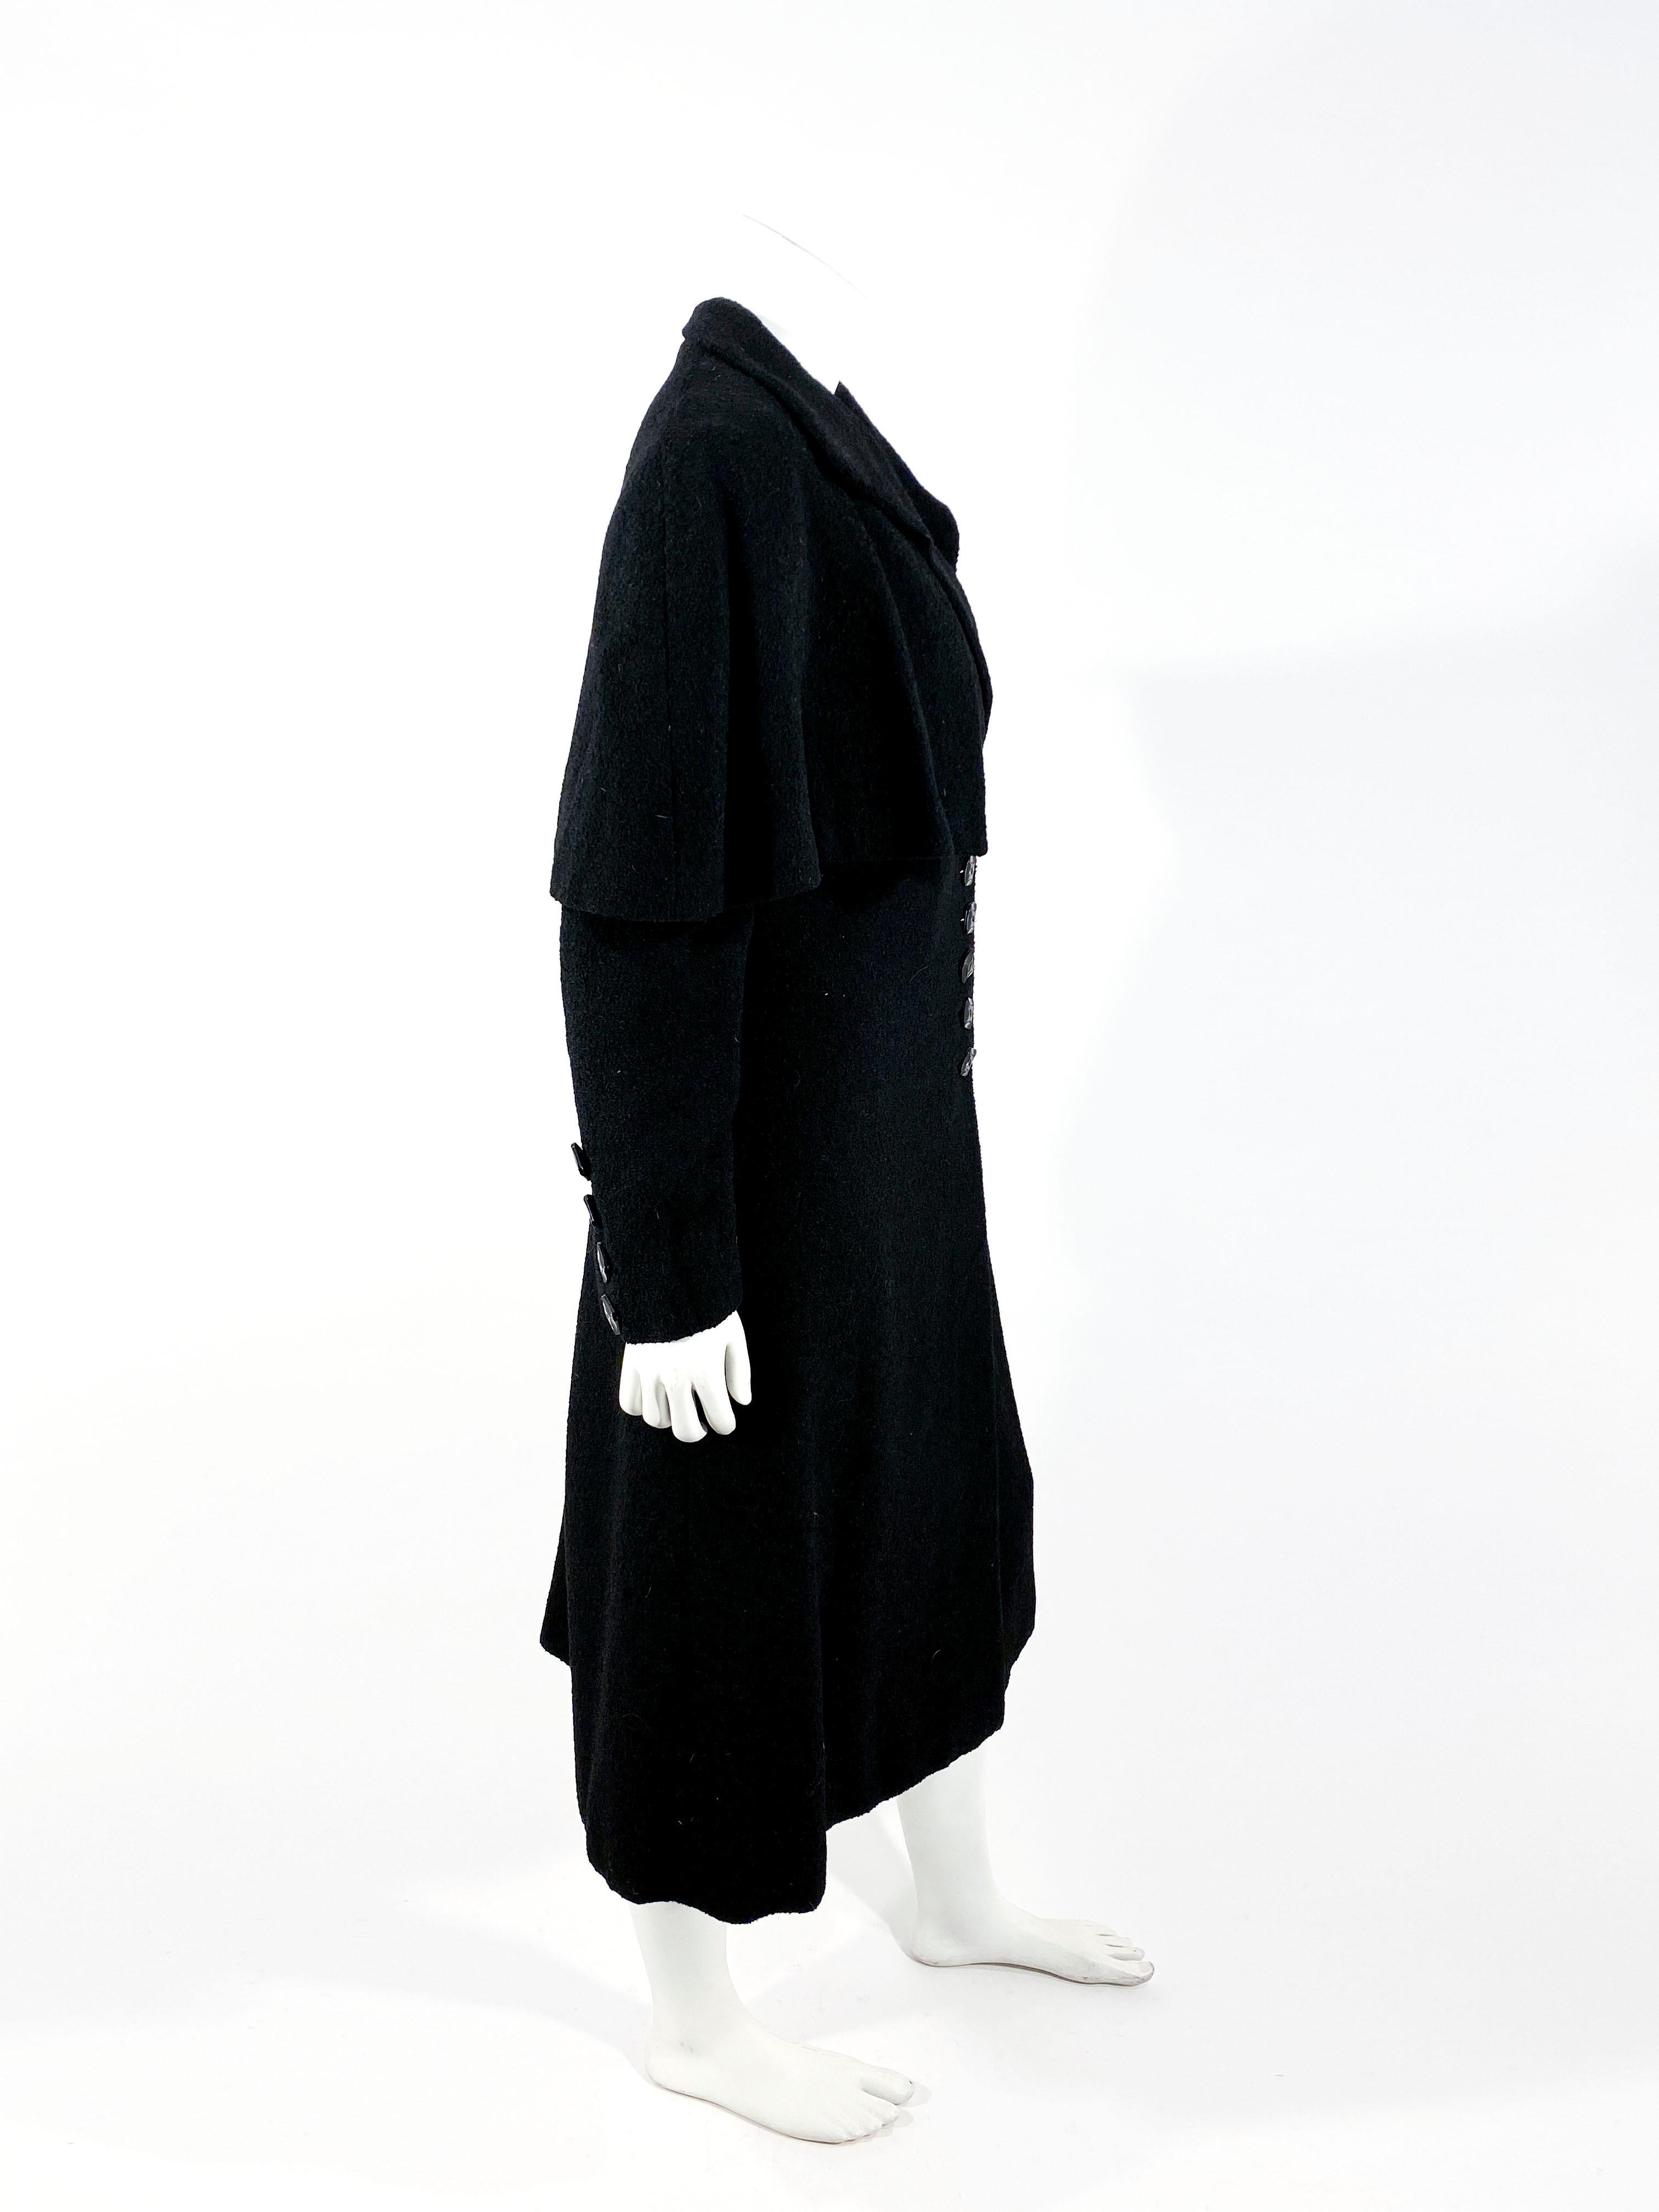 1930s Black Wool Coat with Button Accents and Capelet In Good Condition For Sale In San Francisco, CA